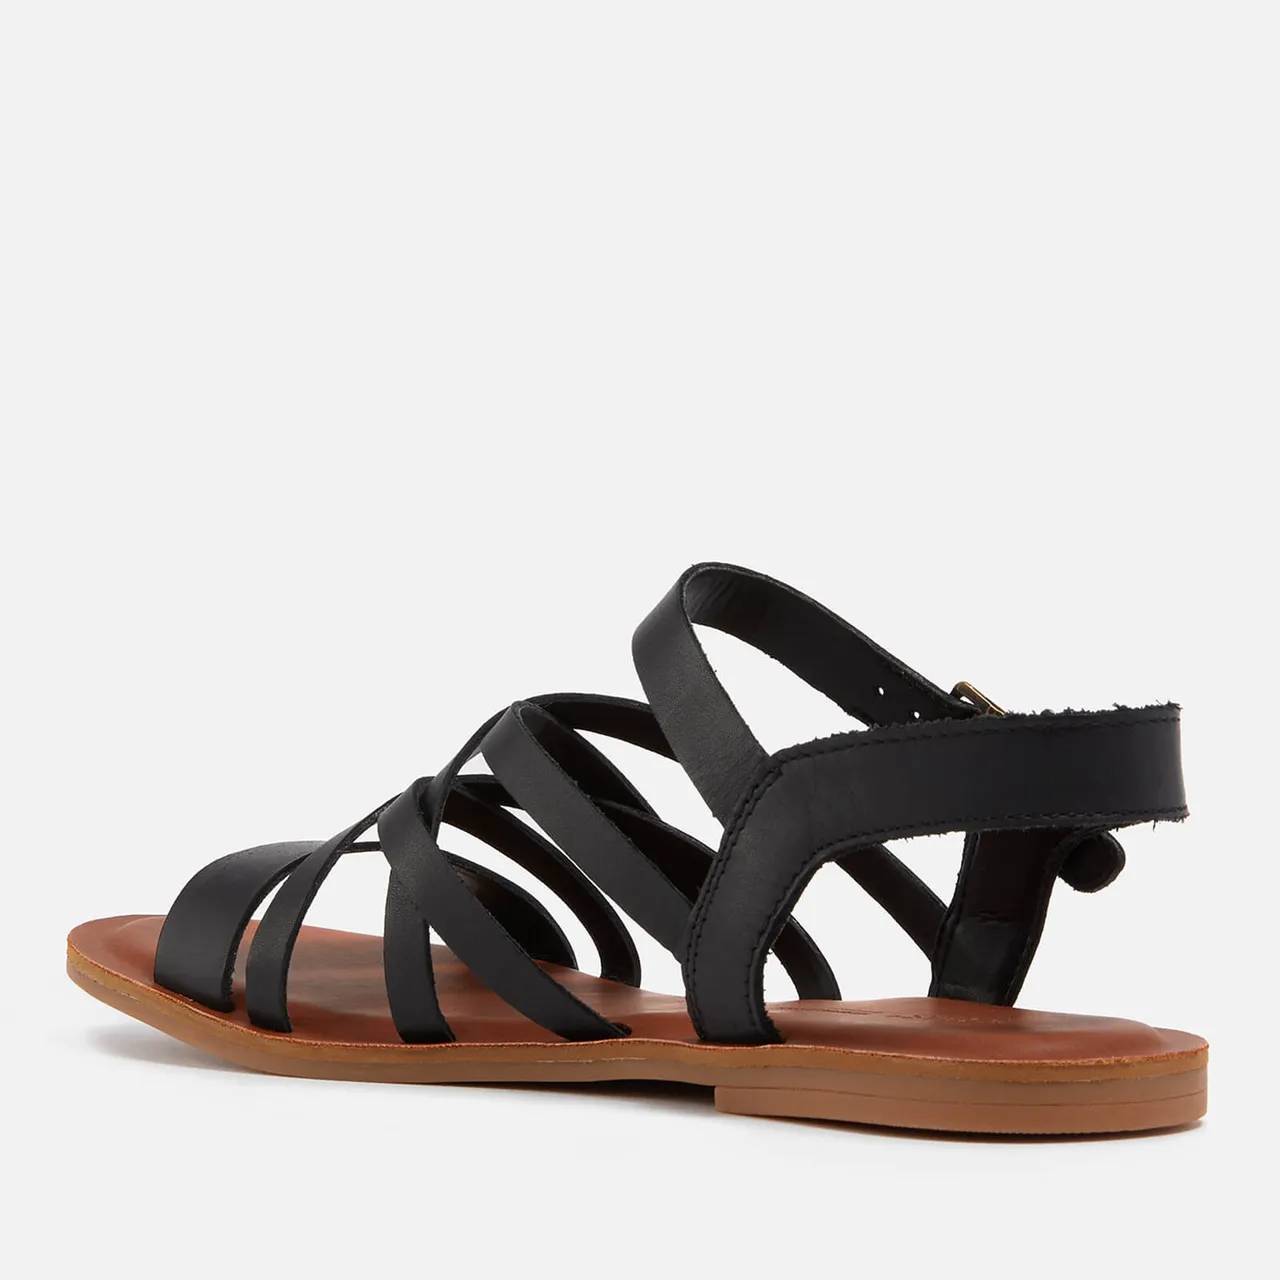 TOMS Women's Sephina Leather Sandals - UK